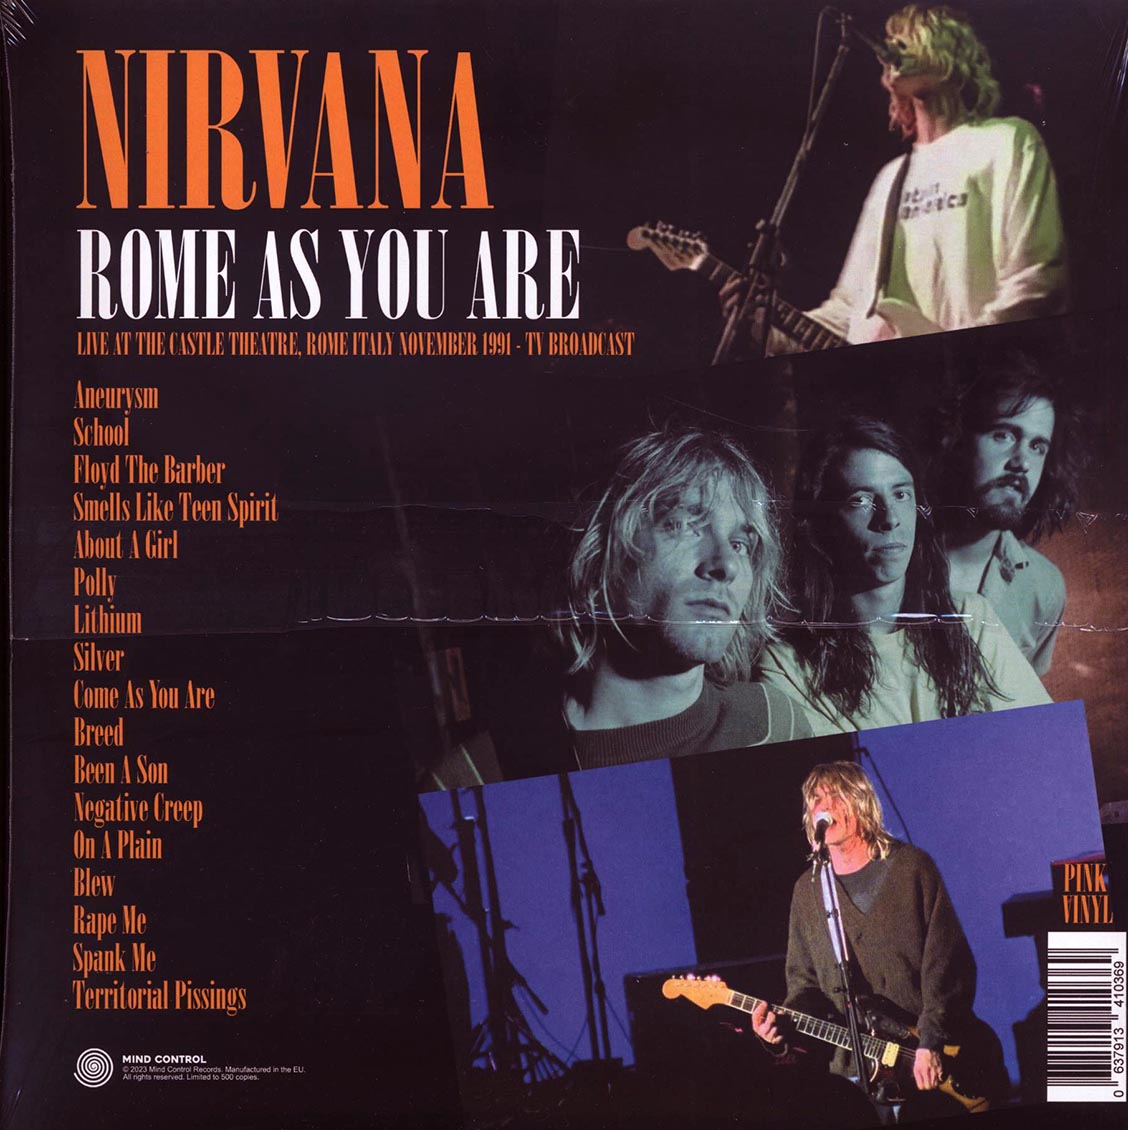 Nirvana - Rome As You Are: Live At The Castle Theatre, Rome, Italy, November 1991 TV Broadcast (ltd. 500 copies made) (pink vinyl) - Vinyl LP, LP